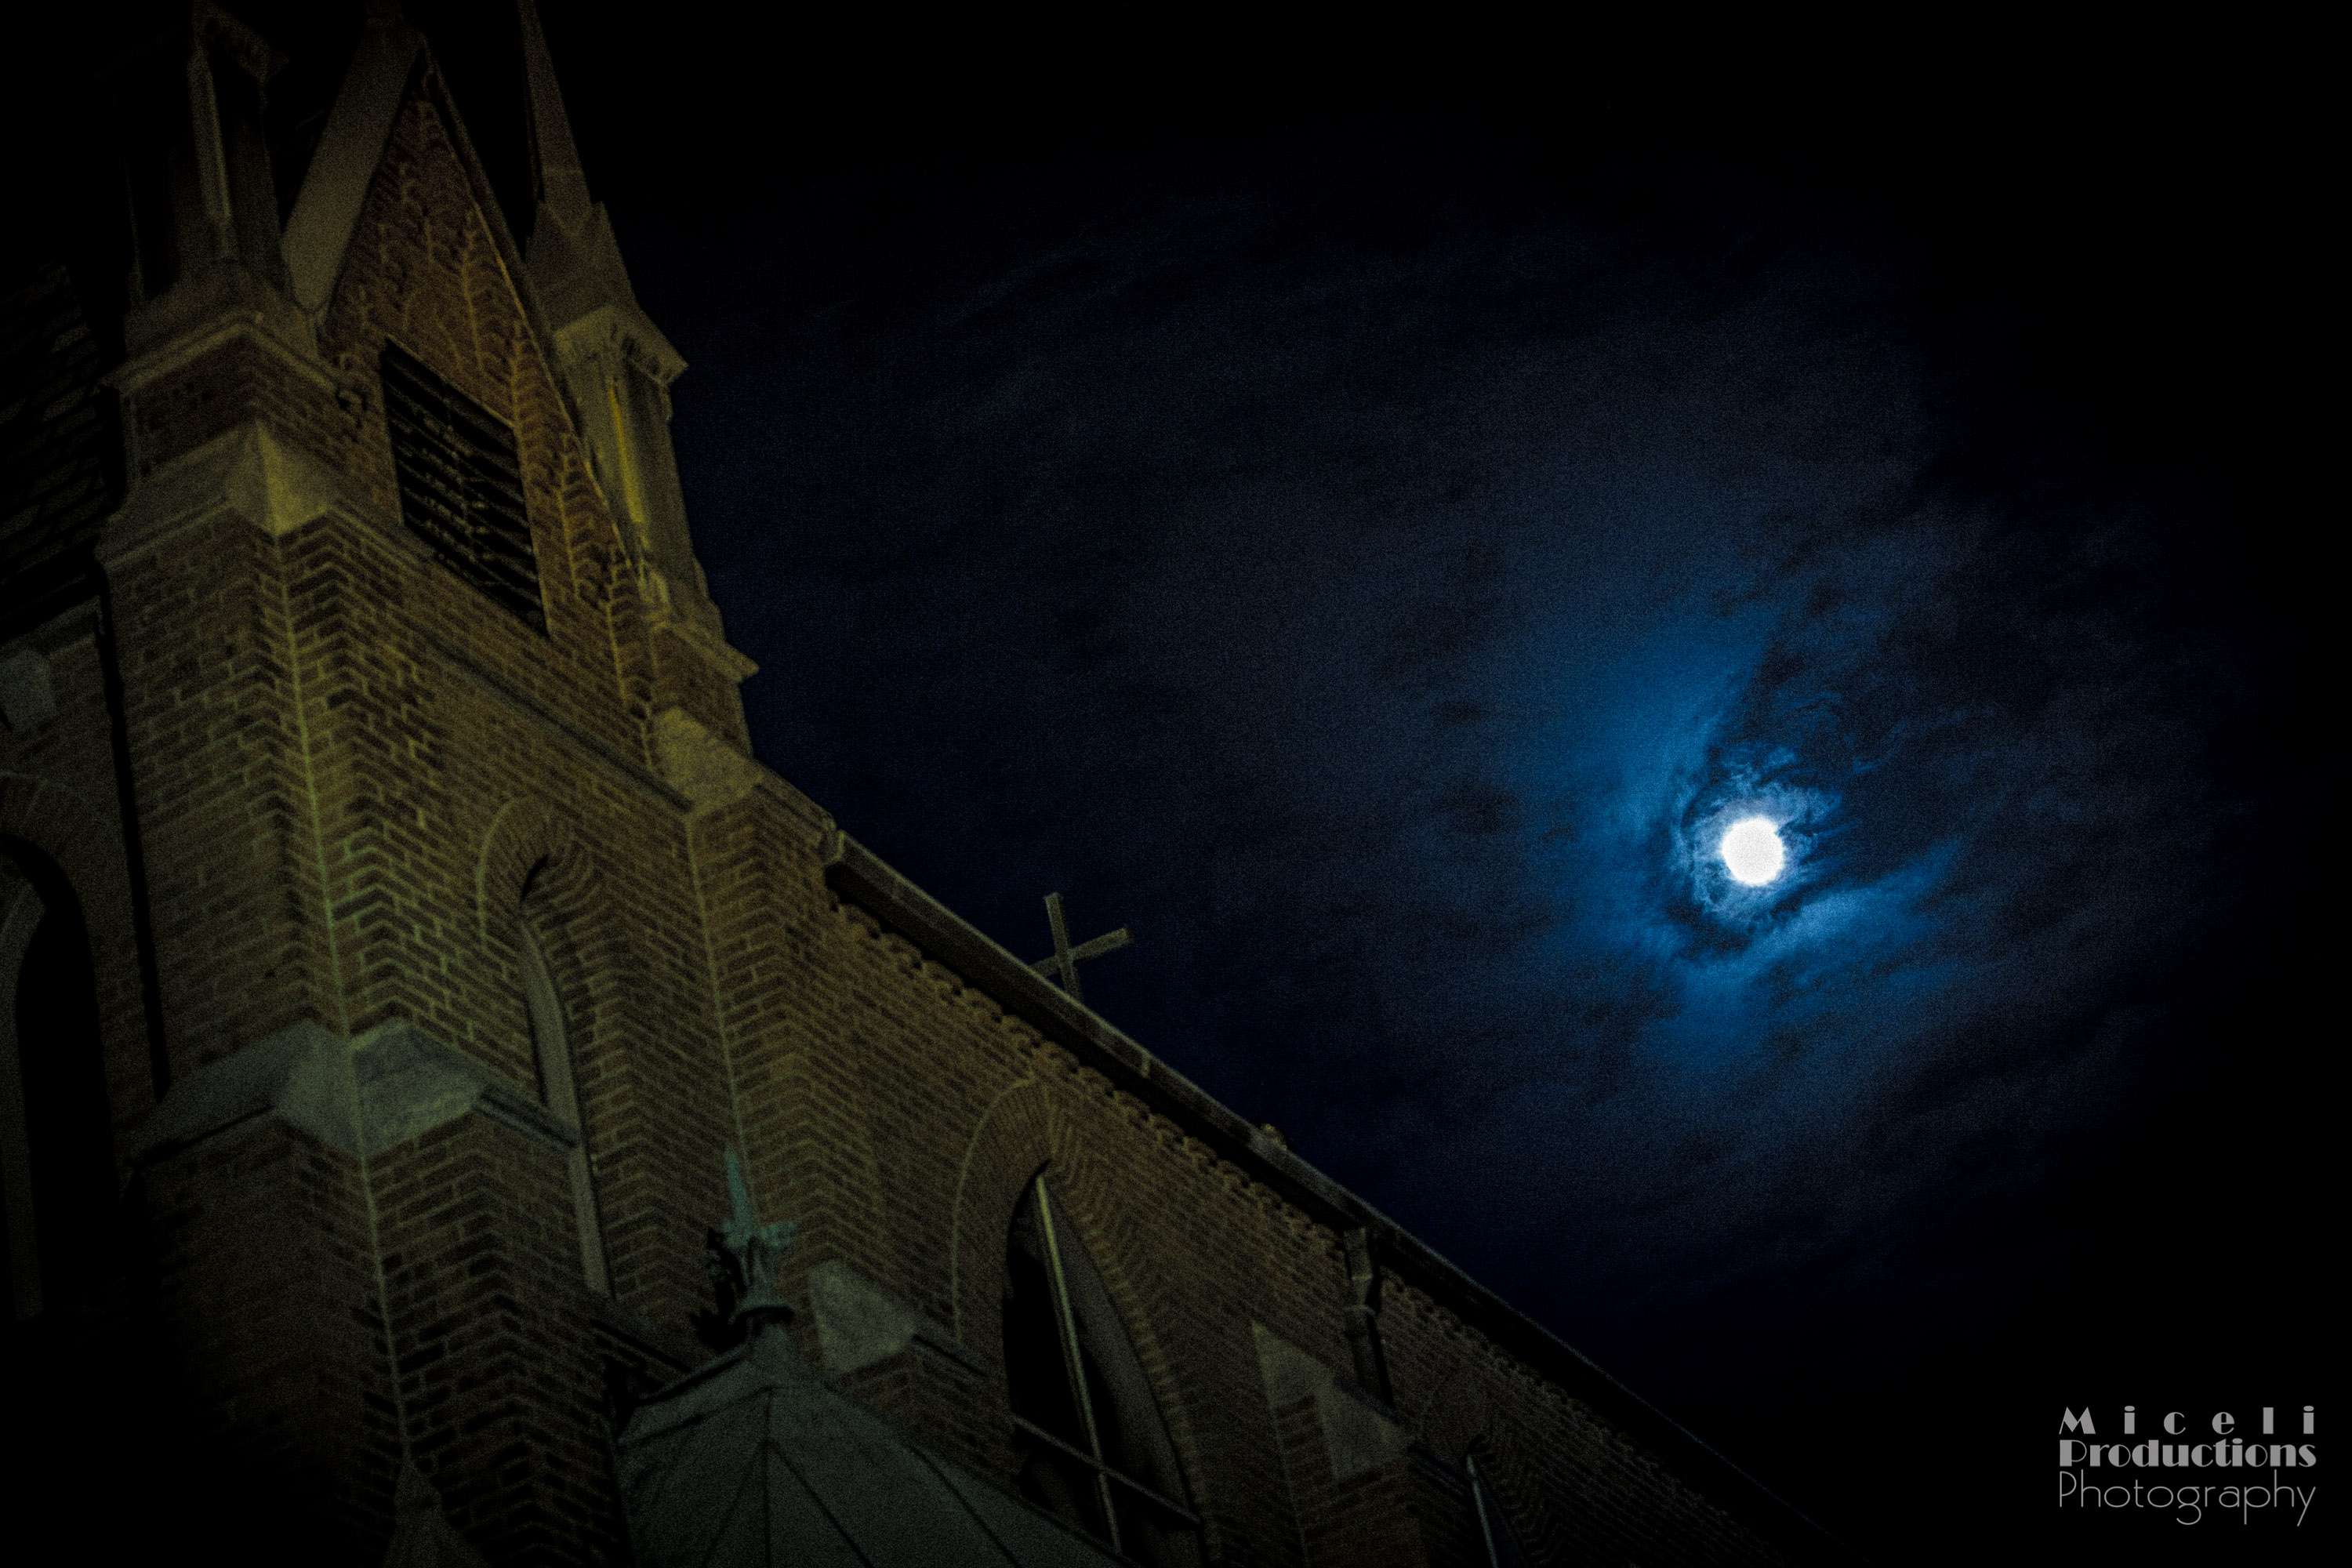 Supermoon illuminates church in Waterbury, CT. Gothic looking cathedral on the left with the moon in the cloud to the right of the image.